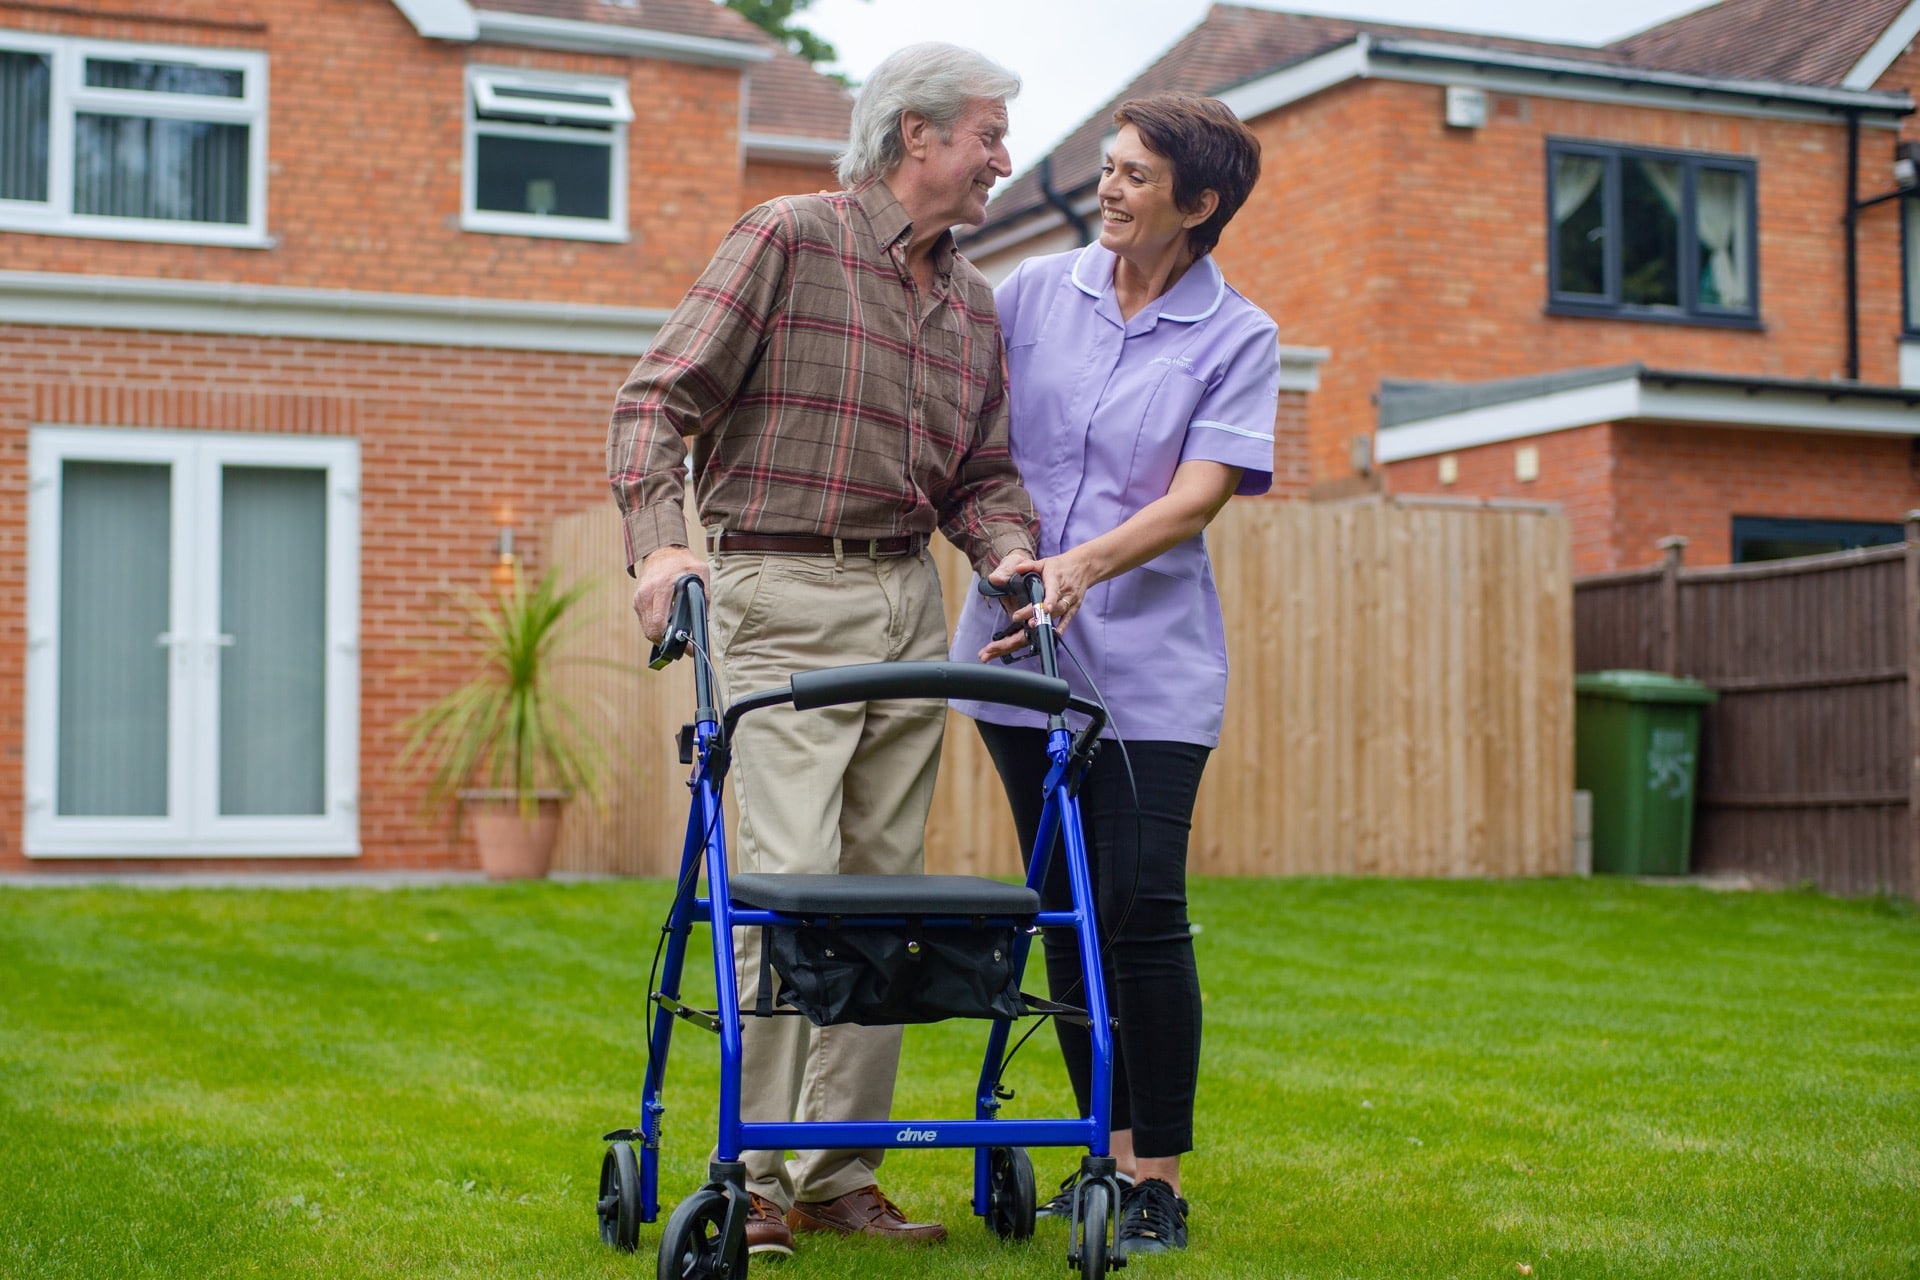 What is the difference between a companion and a carer?